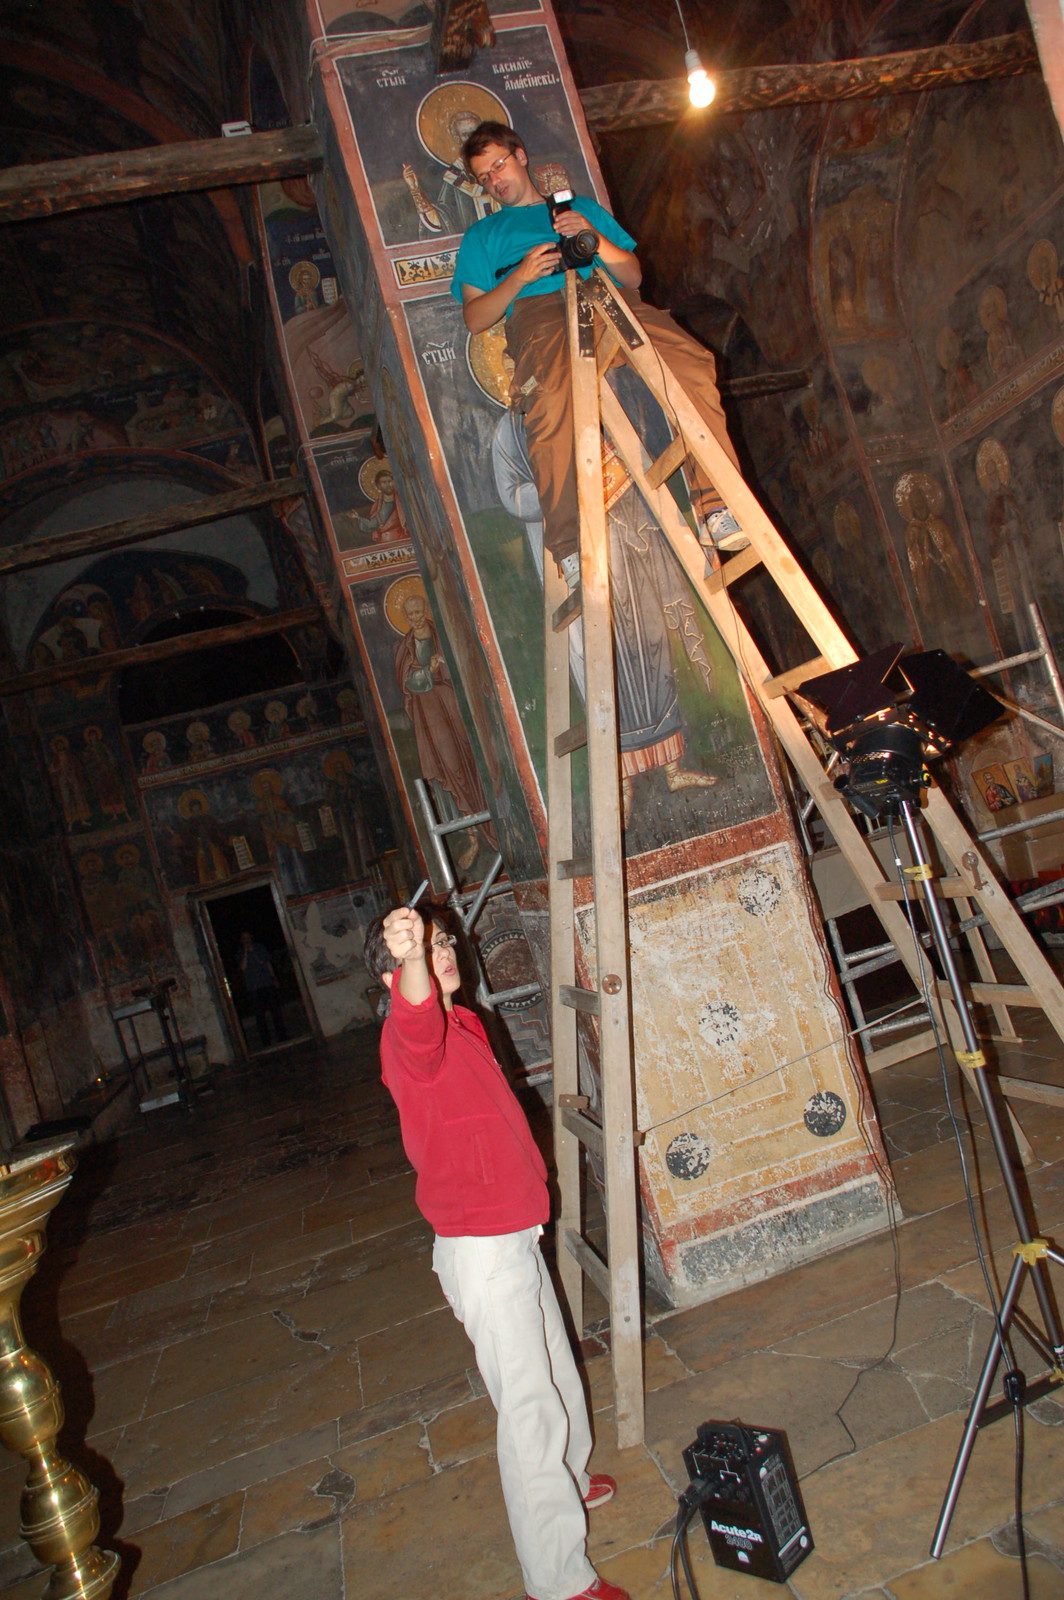 Taking photos inside Patriarchate of Pec